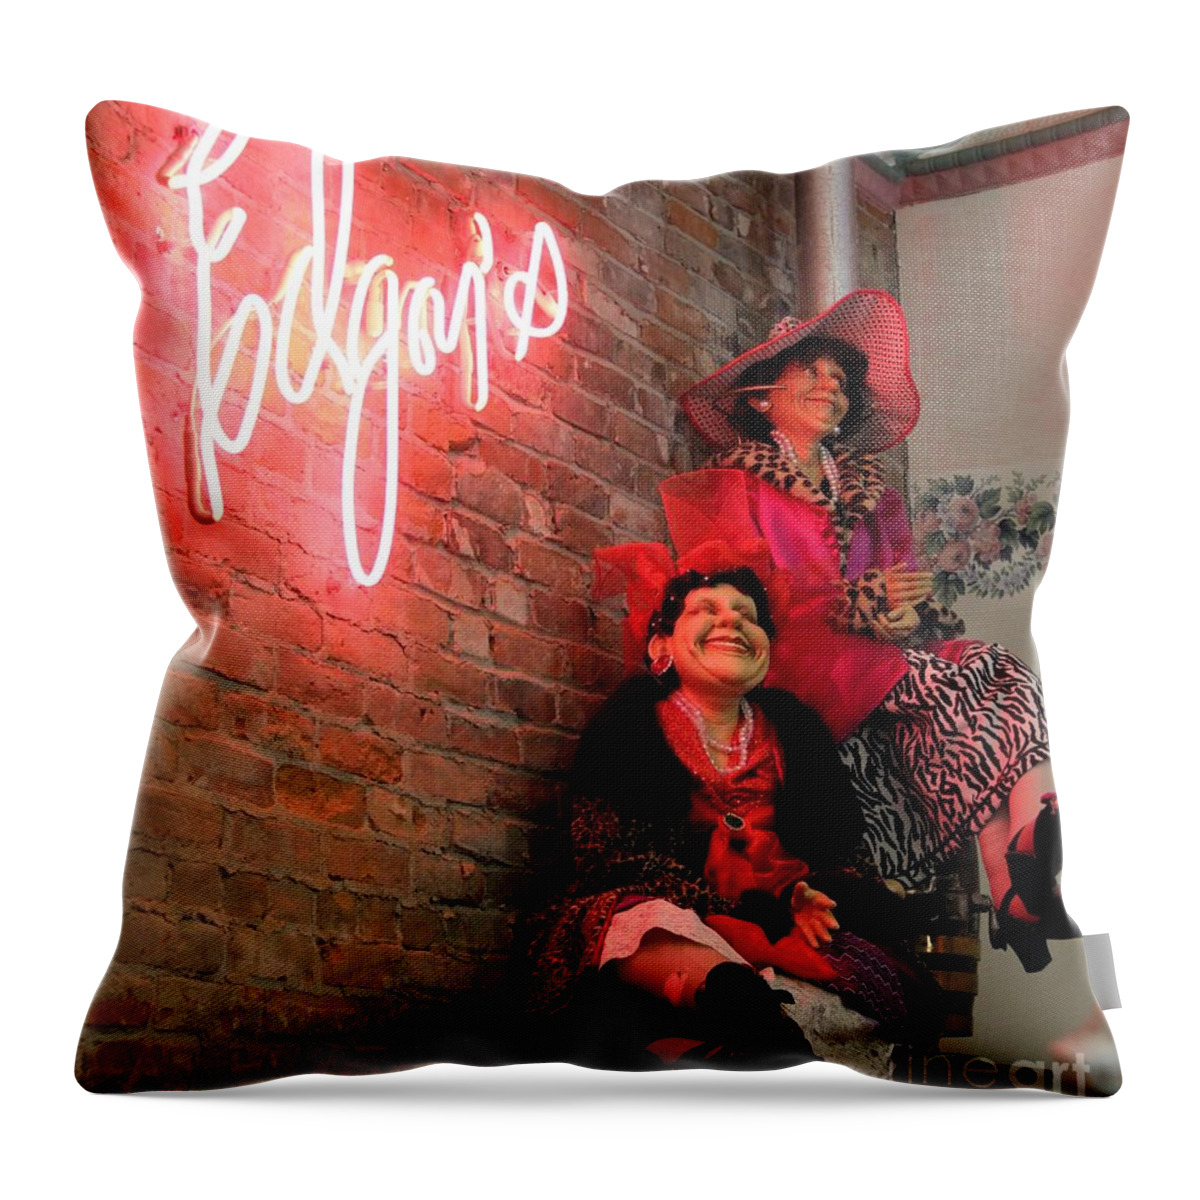 Wall Deco Throw Pillow featuring the photograph Ice cream parlor wall deco by Yumi Johnson